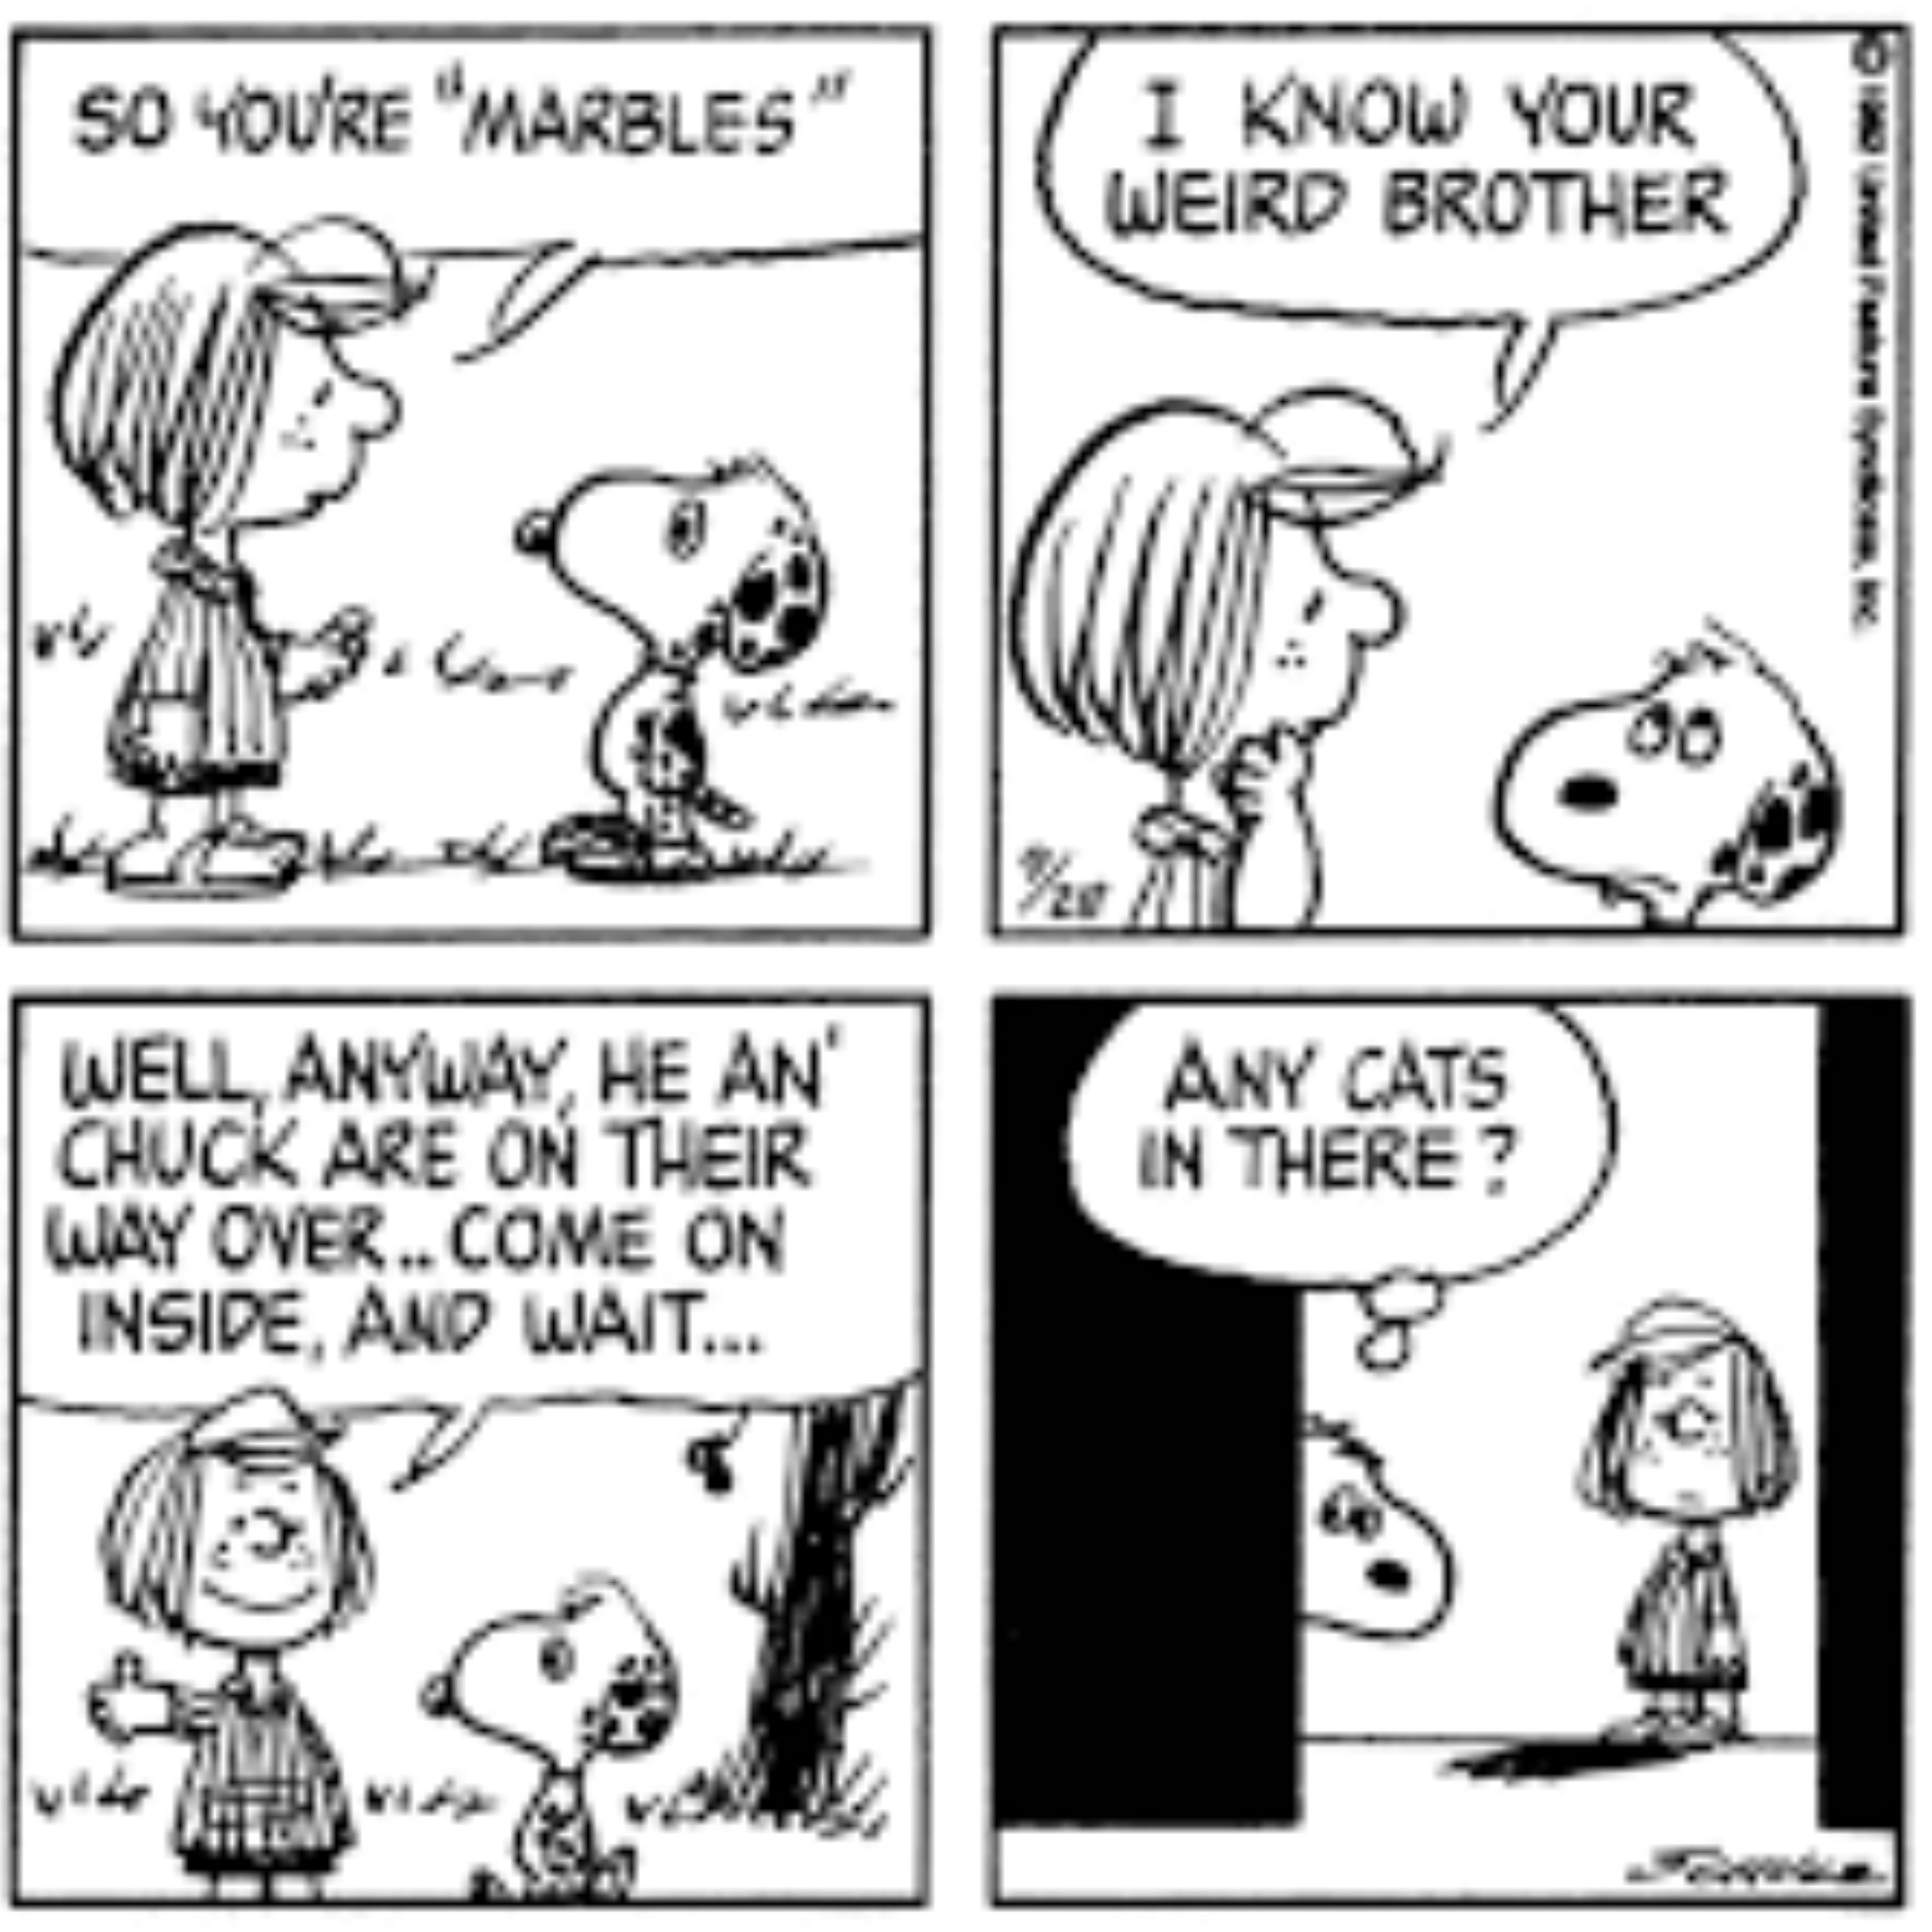 Marbles and Peppermint Patty peanuts